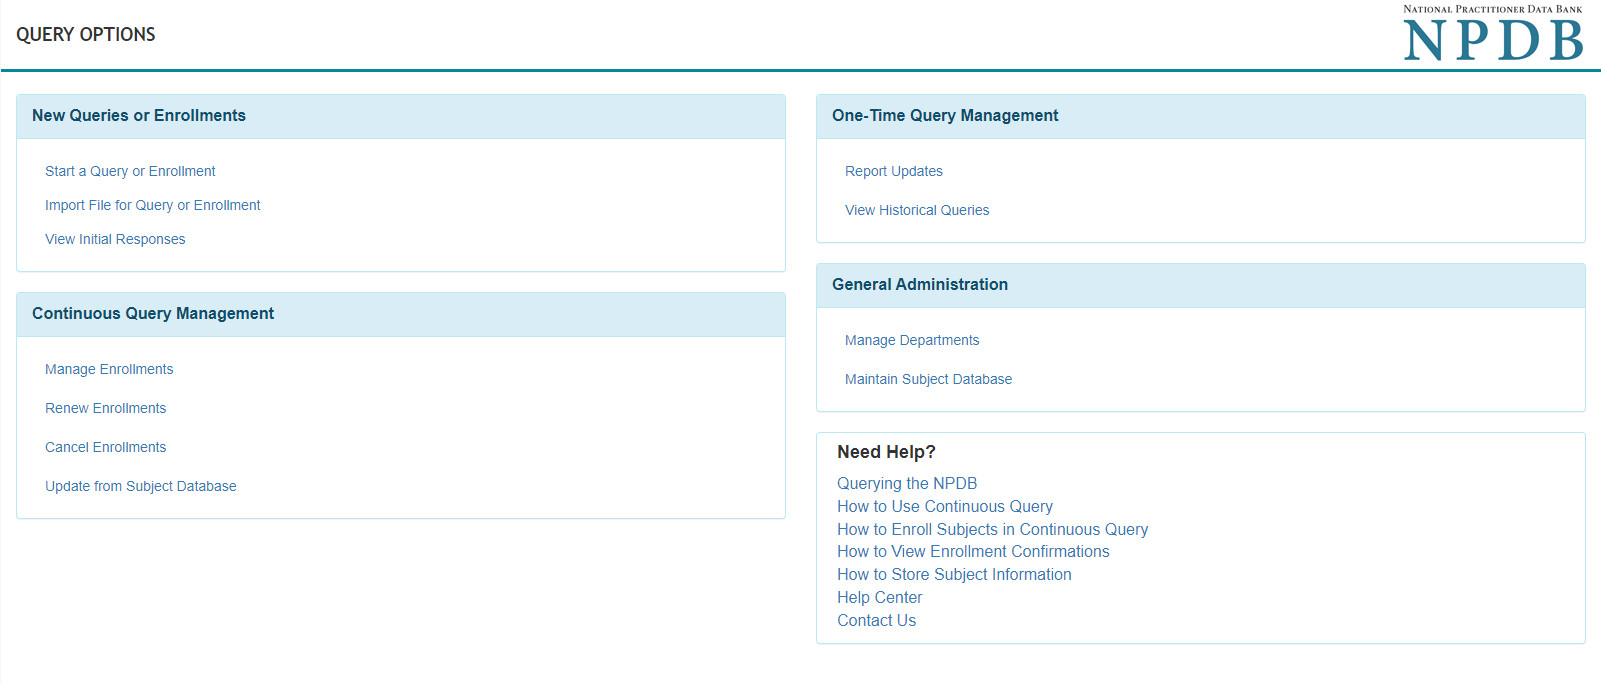 Screenshot of the Query Options Page